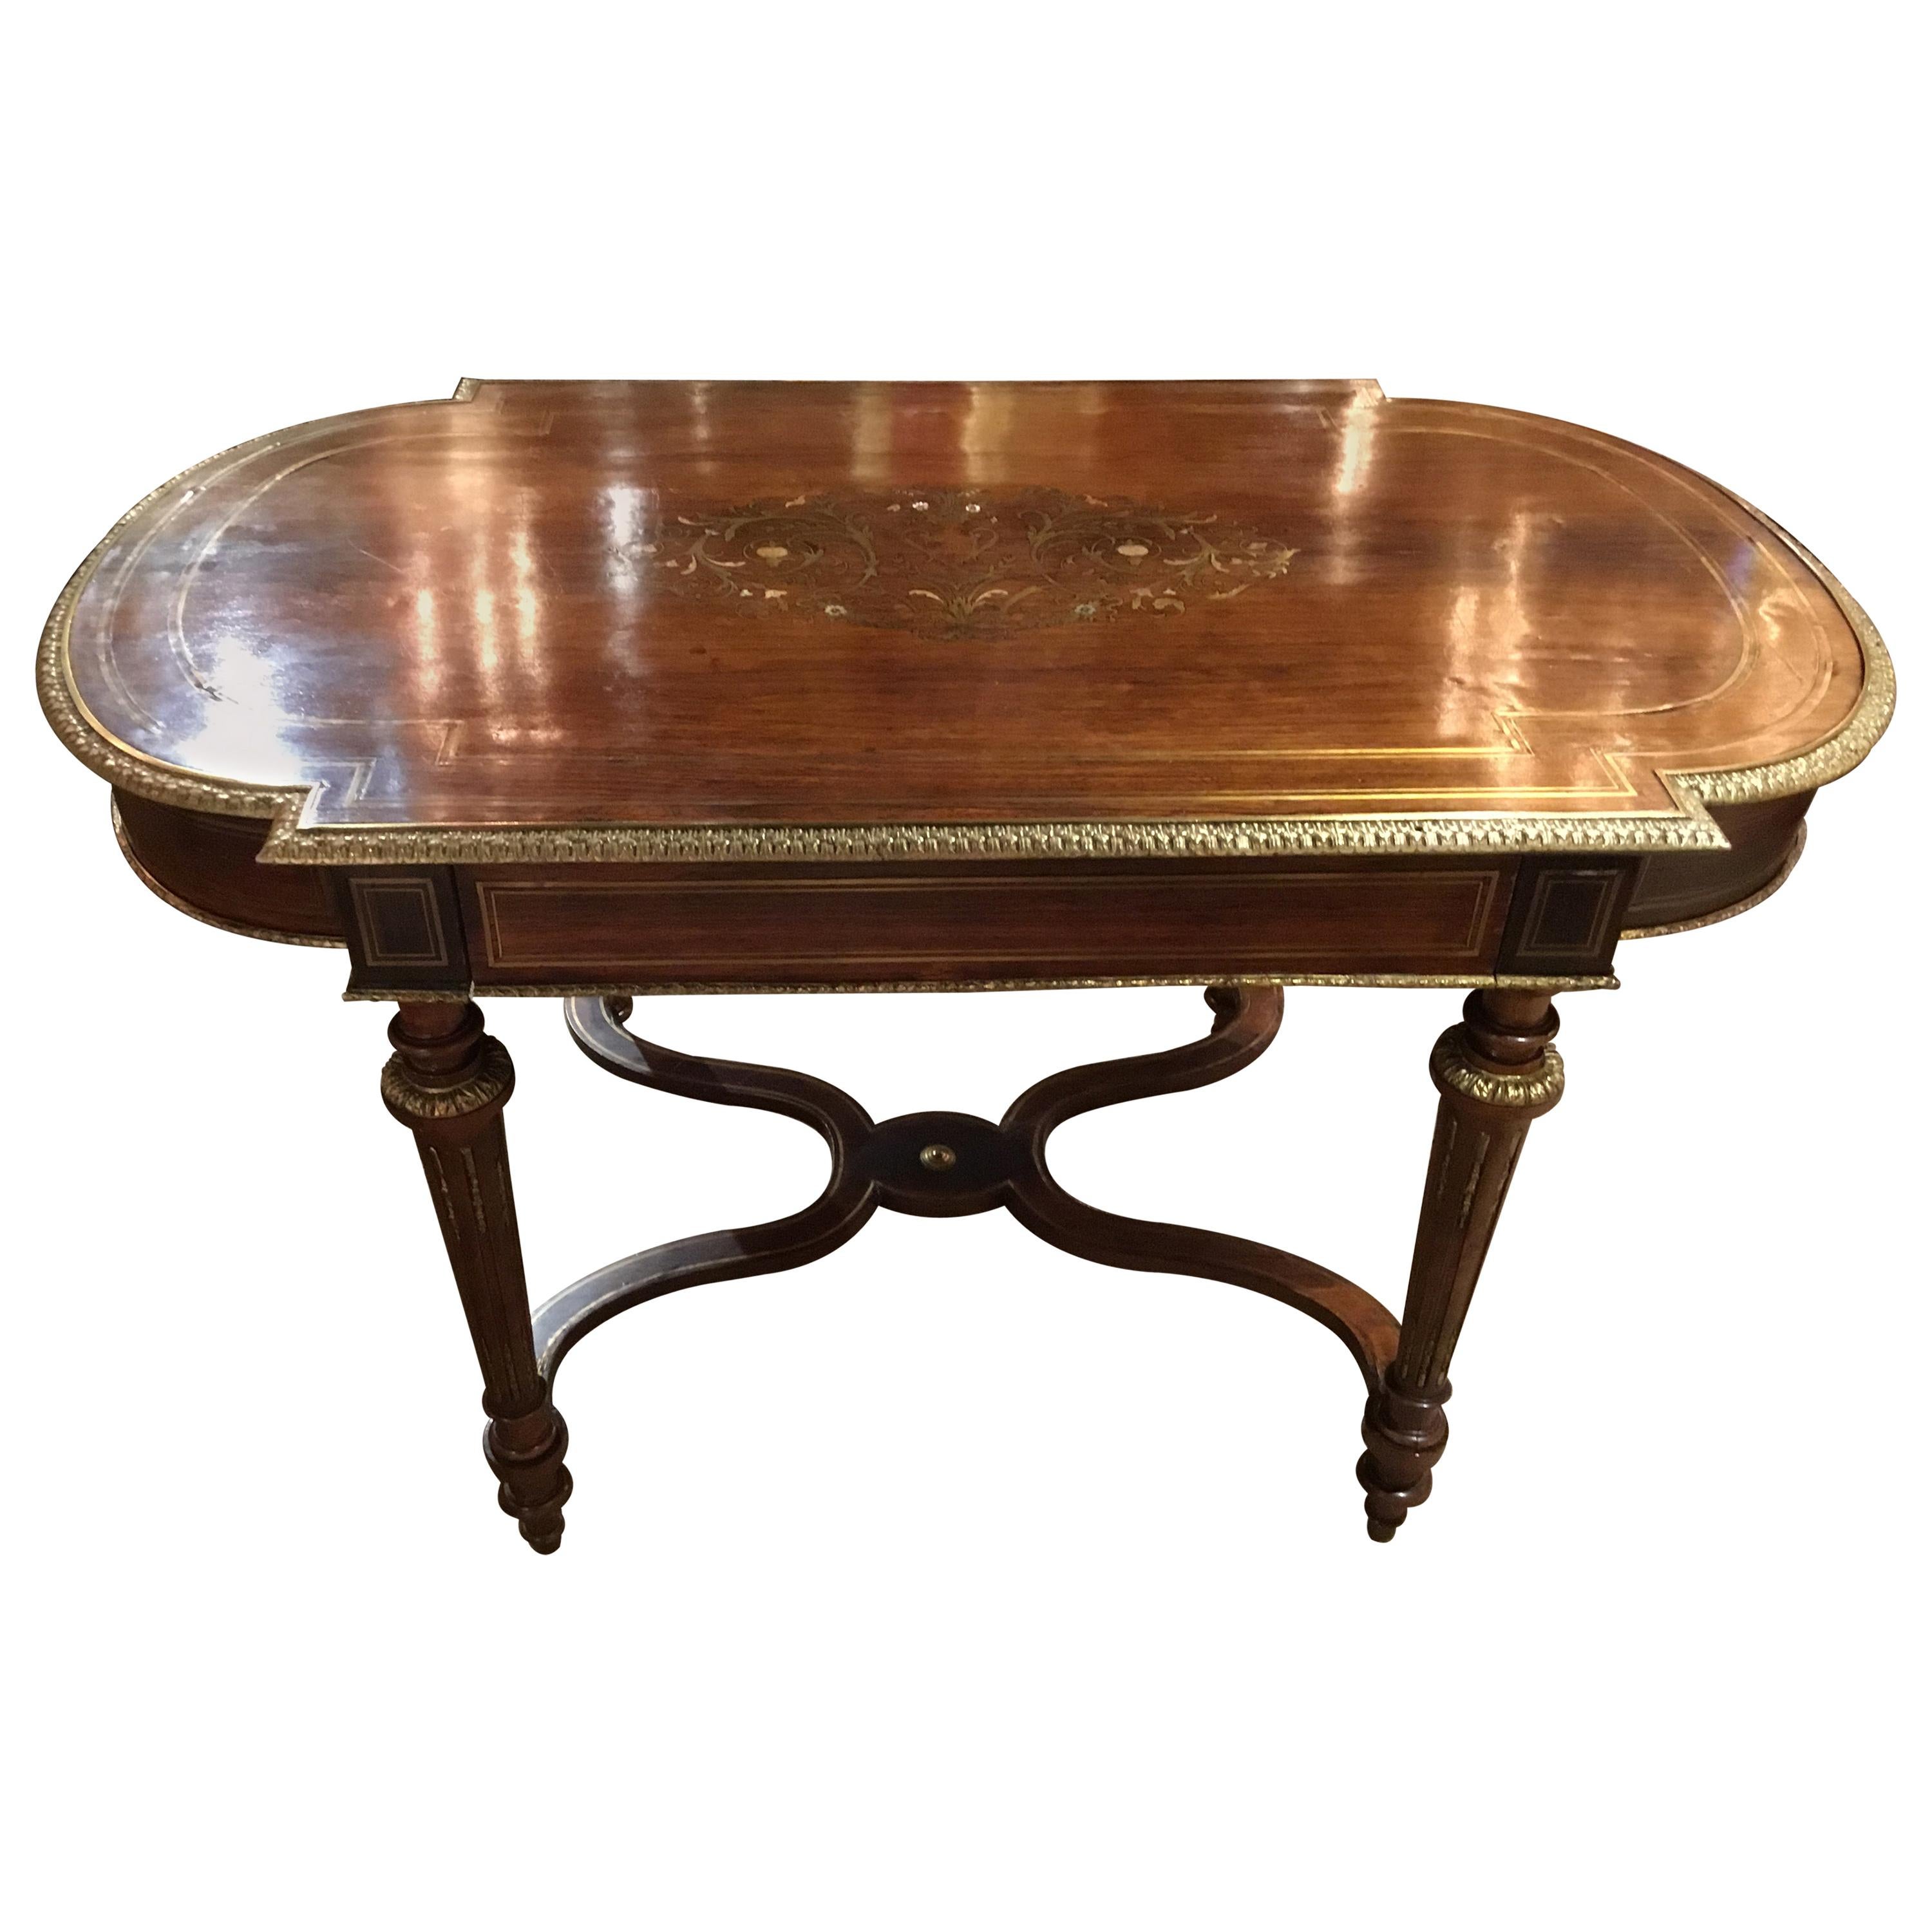 French Napoleon III Center Table, Oval Form, Brass Inlays, and Gilt Bronze Trim